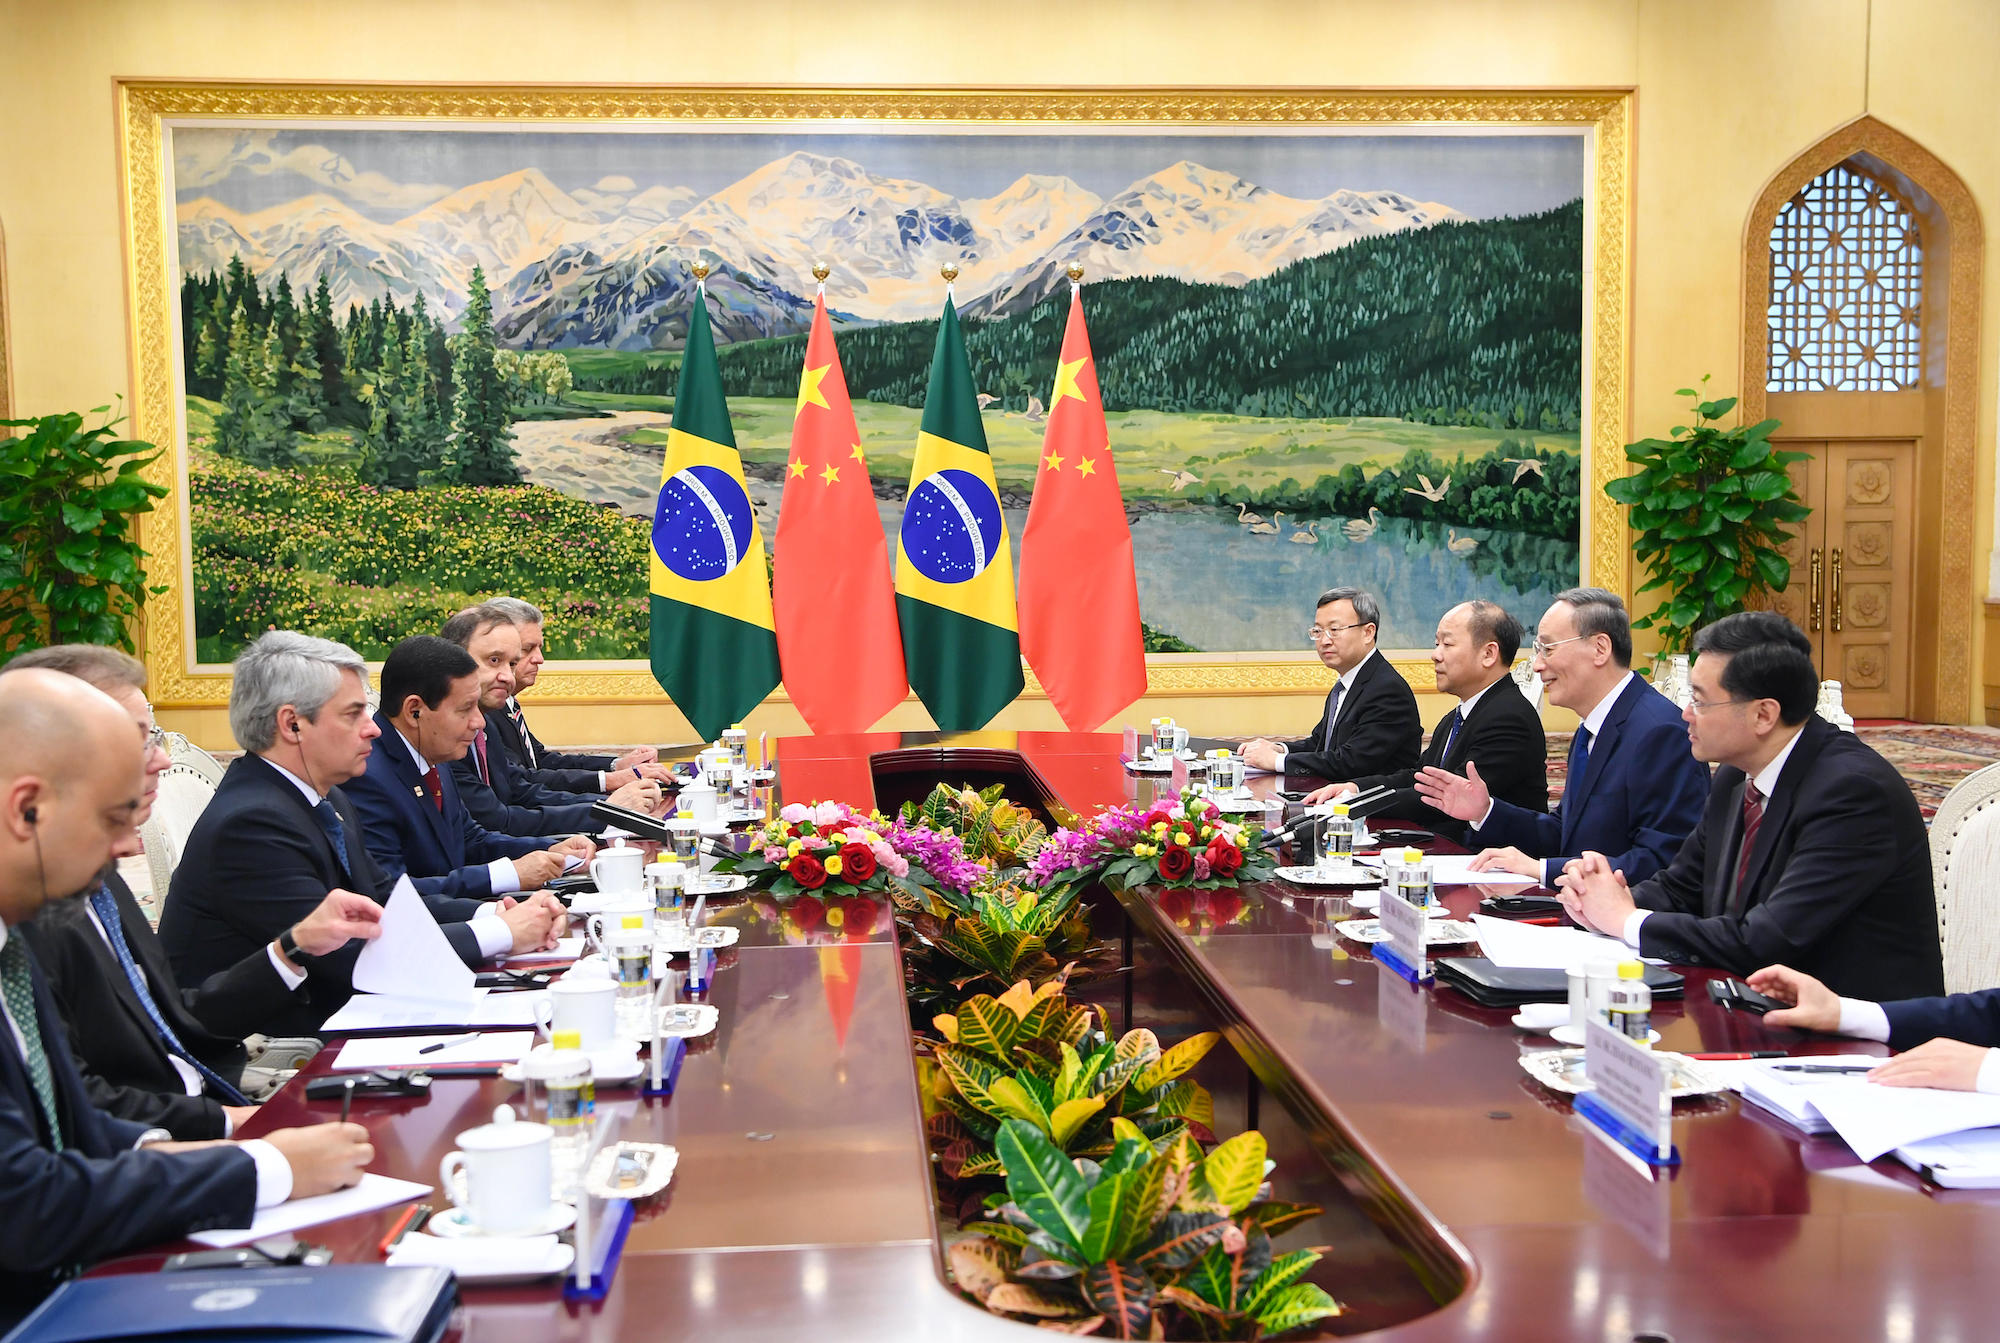 A meeting of the China-Brazil High-Level Coordination and Cooperation Committee (COSBAN) in Beijing